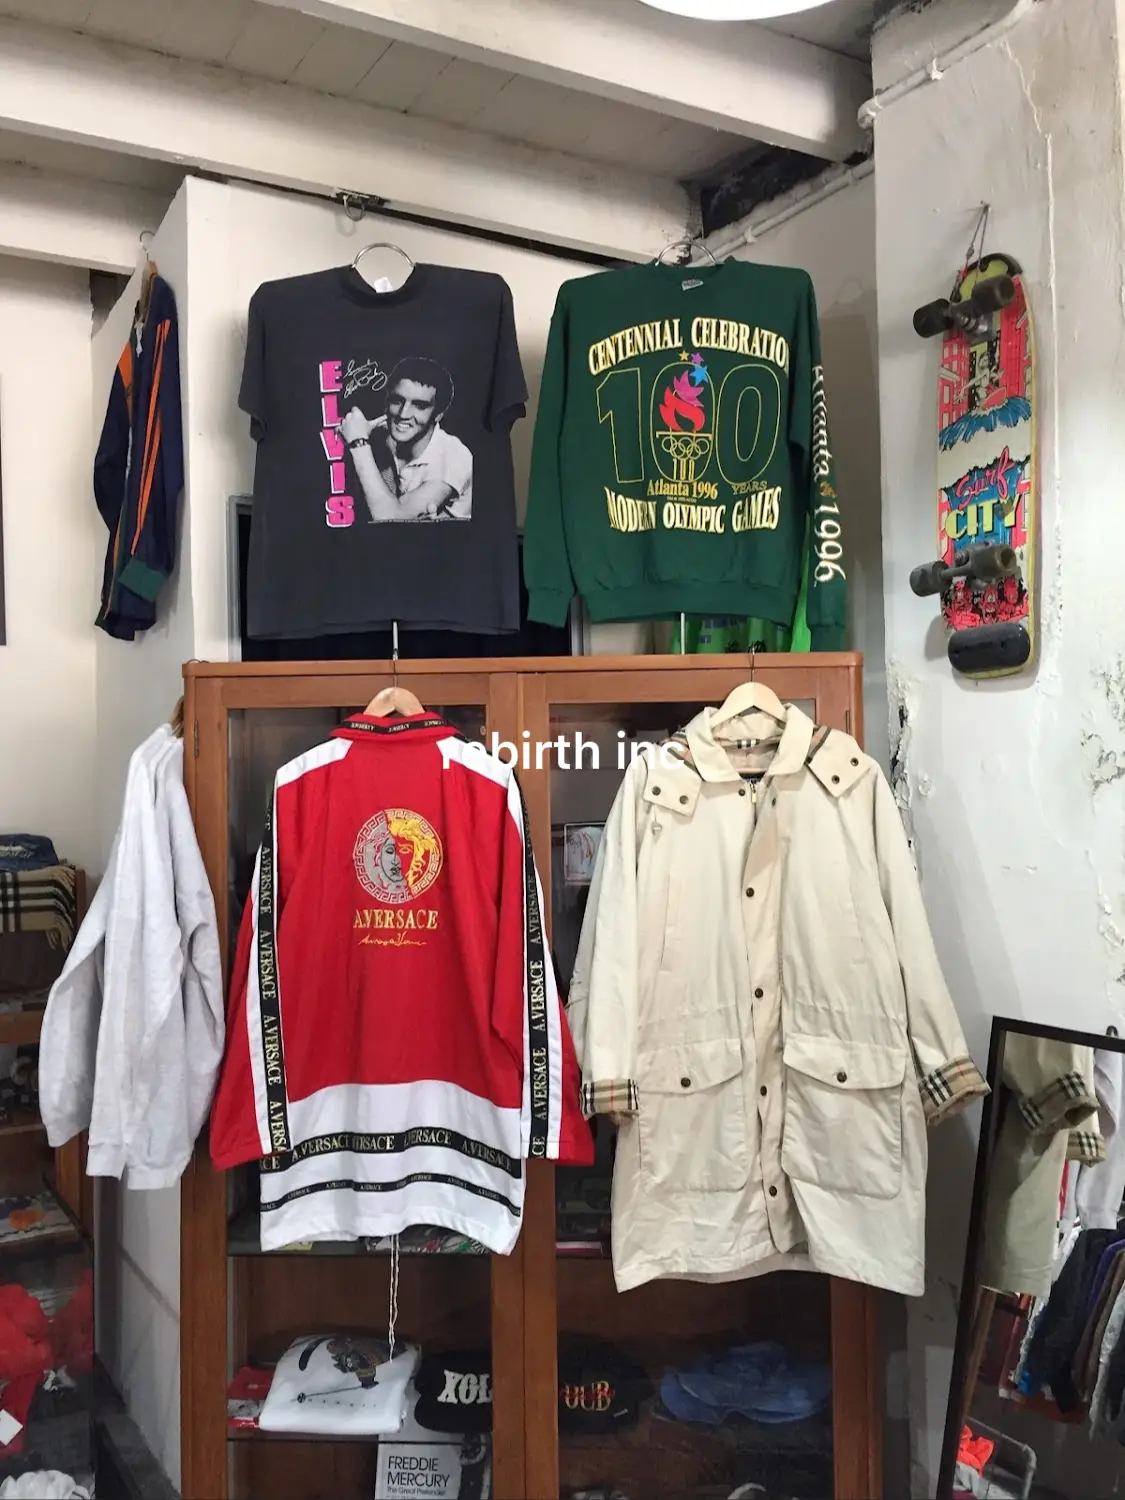 BTS Thrift Store - END OF THE YEAR CLEARANCE SALE! 50% Off Storewide! This  Sale Ends New Year's Eve, Monday, December 31st. BTS Thrift Store is a  great place for finding some